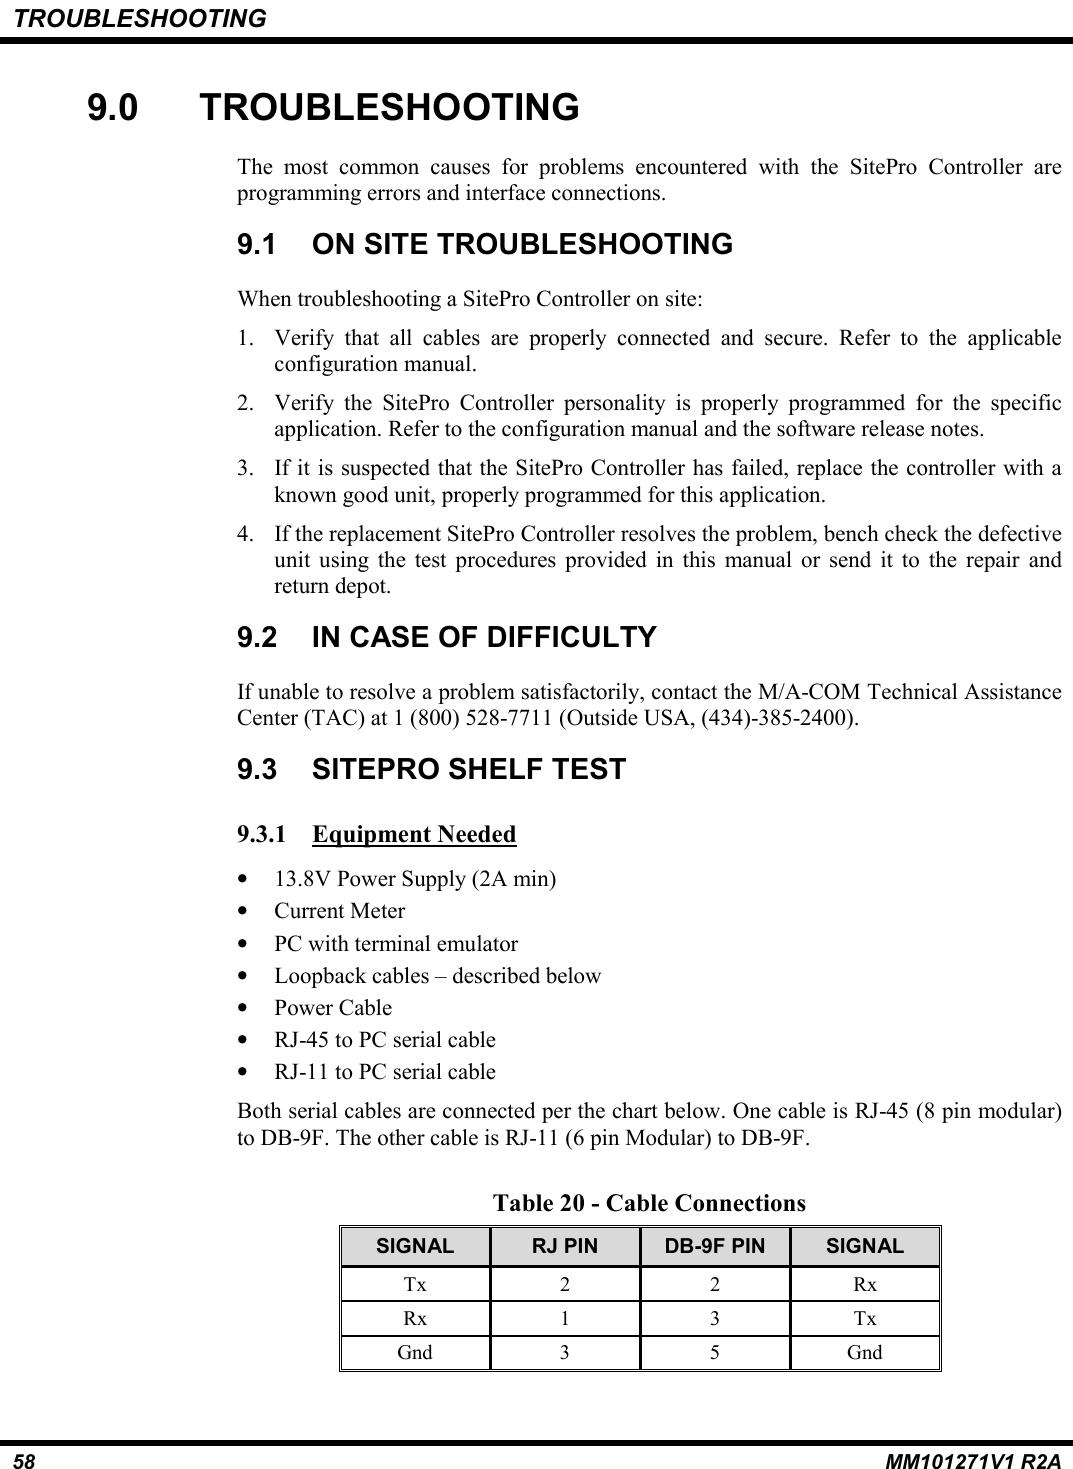 TROUBLESHOOTING58 MM101271V1 R2A9.0 TROUBLESHOOTINGThe most common causes for problems encountered with the SitePro Controller areprogramming errors and interface connections.9.1  ON SITE TROUBLESHOOTINGWhen troubleshooting a SitePro Controller on site:1. Verify that all cables are properly connected and secure. Refer to the applicableconfiguration manual.2. Verify the SitePro Controller personality is properly programmed for the specificapplication. Refer to the configuration manual and the software release notes.3. If it is suspected that the SitePro Controller has failed, replace the controller with aknown good unit, properly programmed for this application.4. If the replacement SitePro Controller resolves the problem, bench check the defectiveunit using the test procedures provided in this manual or send it to the repair andreturn depot.9.2  IN CASE OF DIFFICULTYIf unable to resolve a problem satisfactorily, contact the M/A-COM Technical AssistanceCenter (TAC) at 1 (800) 528-7711 (Outside USA, (434)-385-2400).9.3 SITEPRO SHELF TEST9.3.1 Equipment Needed• 13.8V Power Supply (2A min)• Current Meter• PC with terminal emulator• Loopback cables – described below• Power Cable• RJ-45 to PC serial cable• RJ-11 to PC serial cableBoth serial cables are connected per the chart below. One cable is RJ-45 (8 pin modular)to DB-9F. The other cable is RJ-11 (6 pin Modular) to DB-9F.Table 20 - Cable ConnectionsSIGNAL RJ PIN DB-9F PIN SIGNALTx 2 2 RxRx 1 3 TxGnd 3 5 Gnd